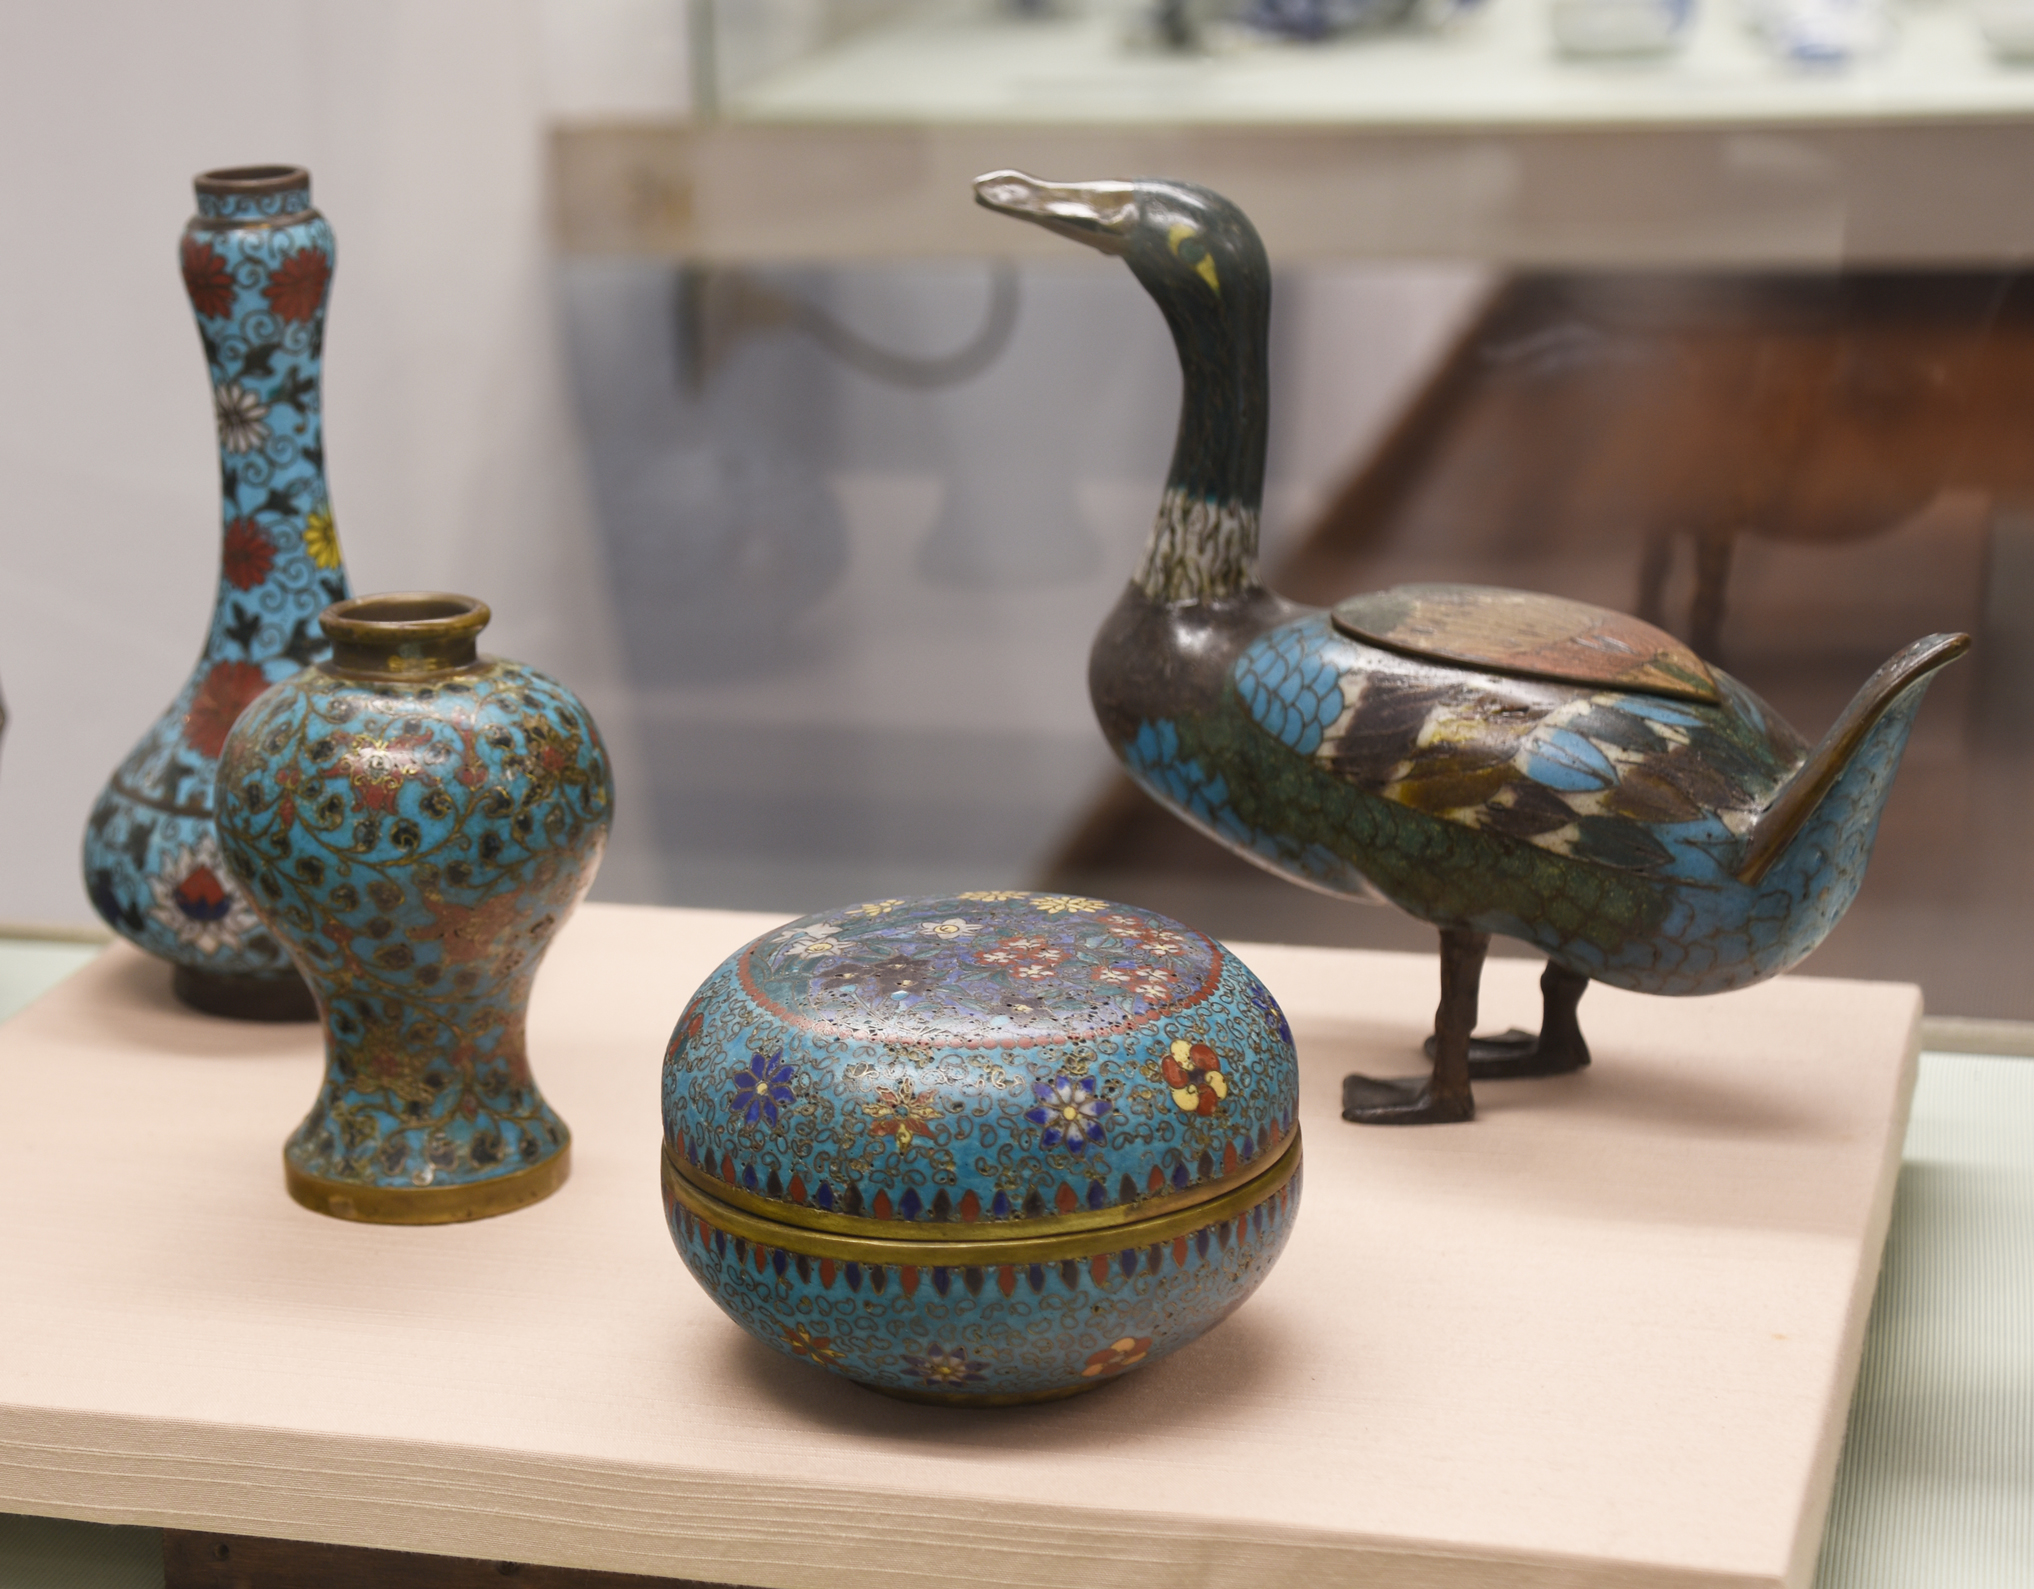 Vases of the Ming Period